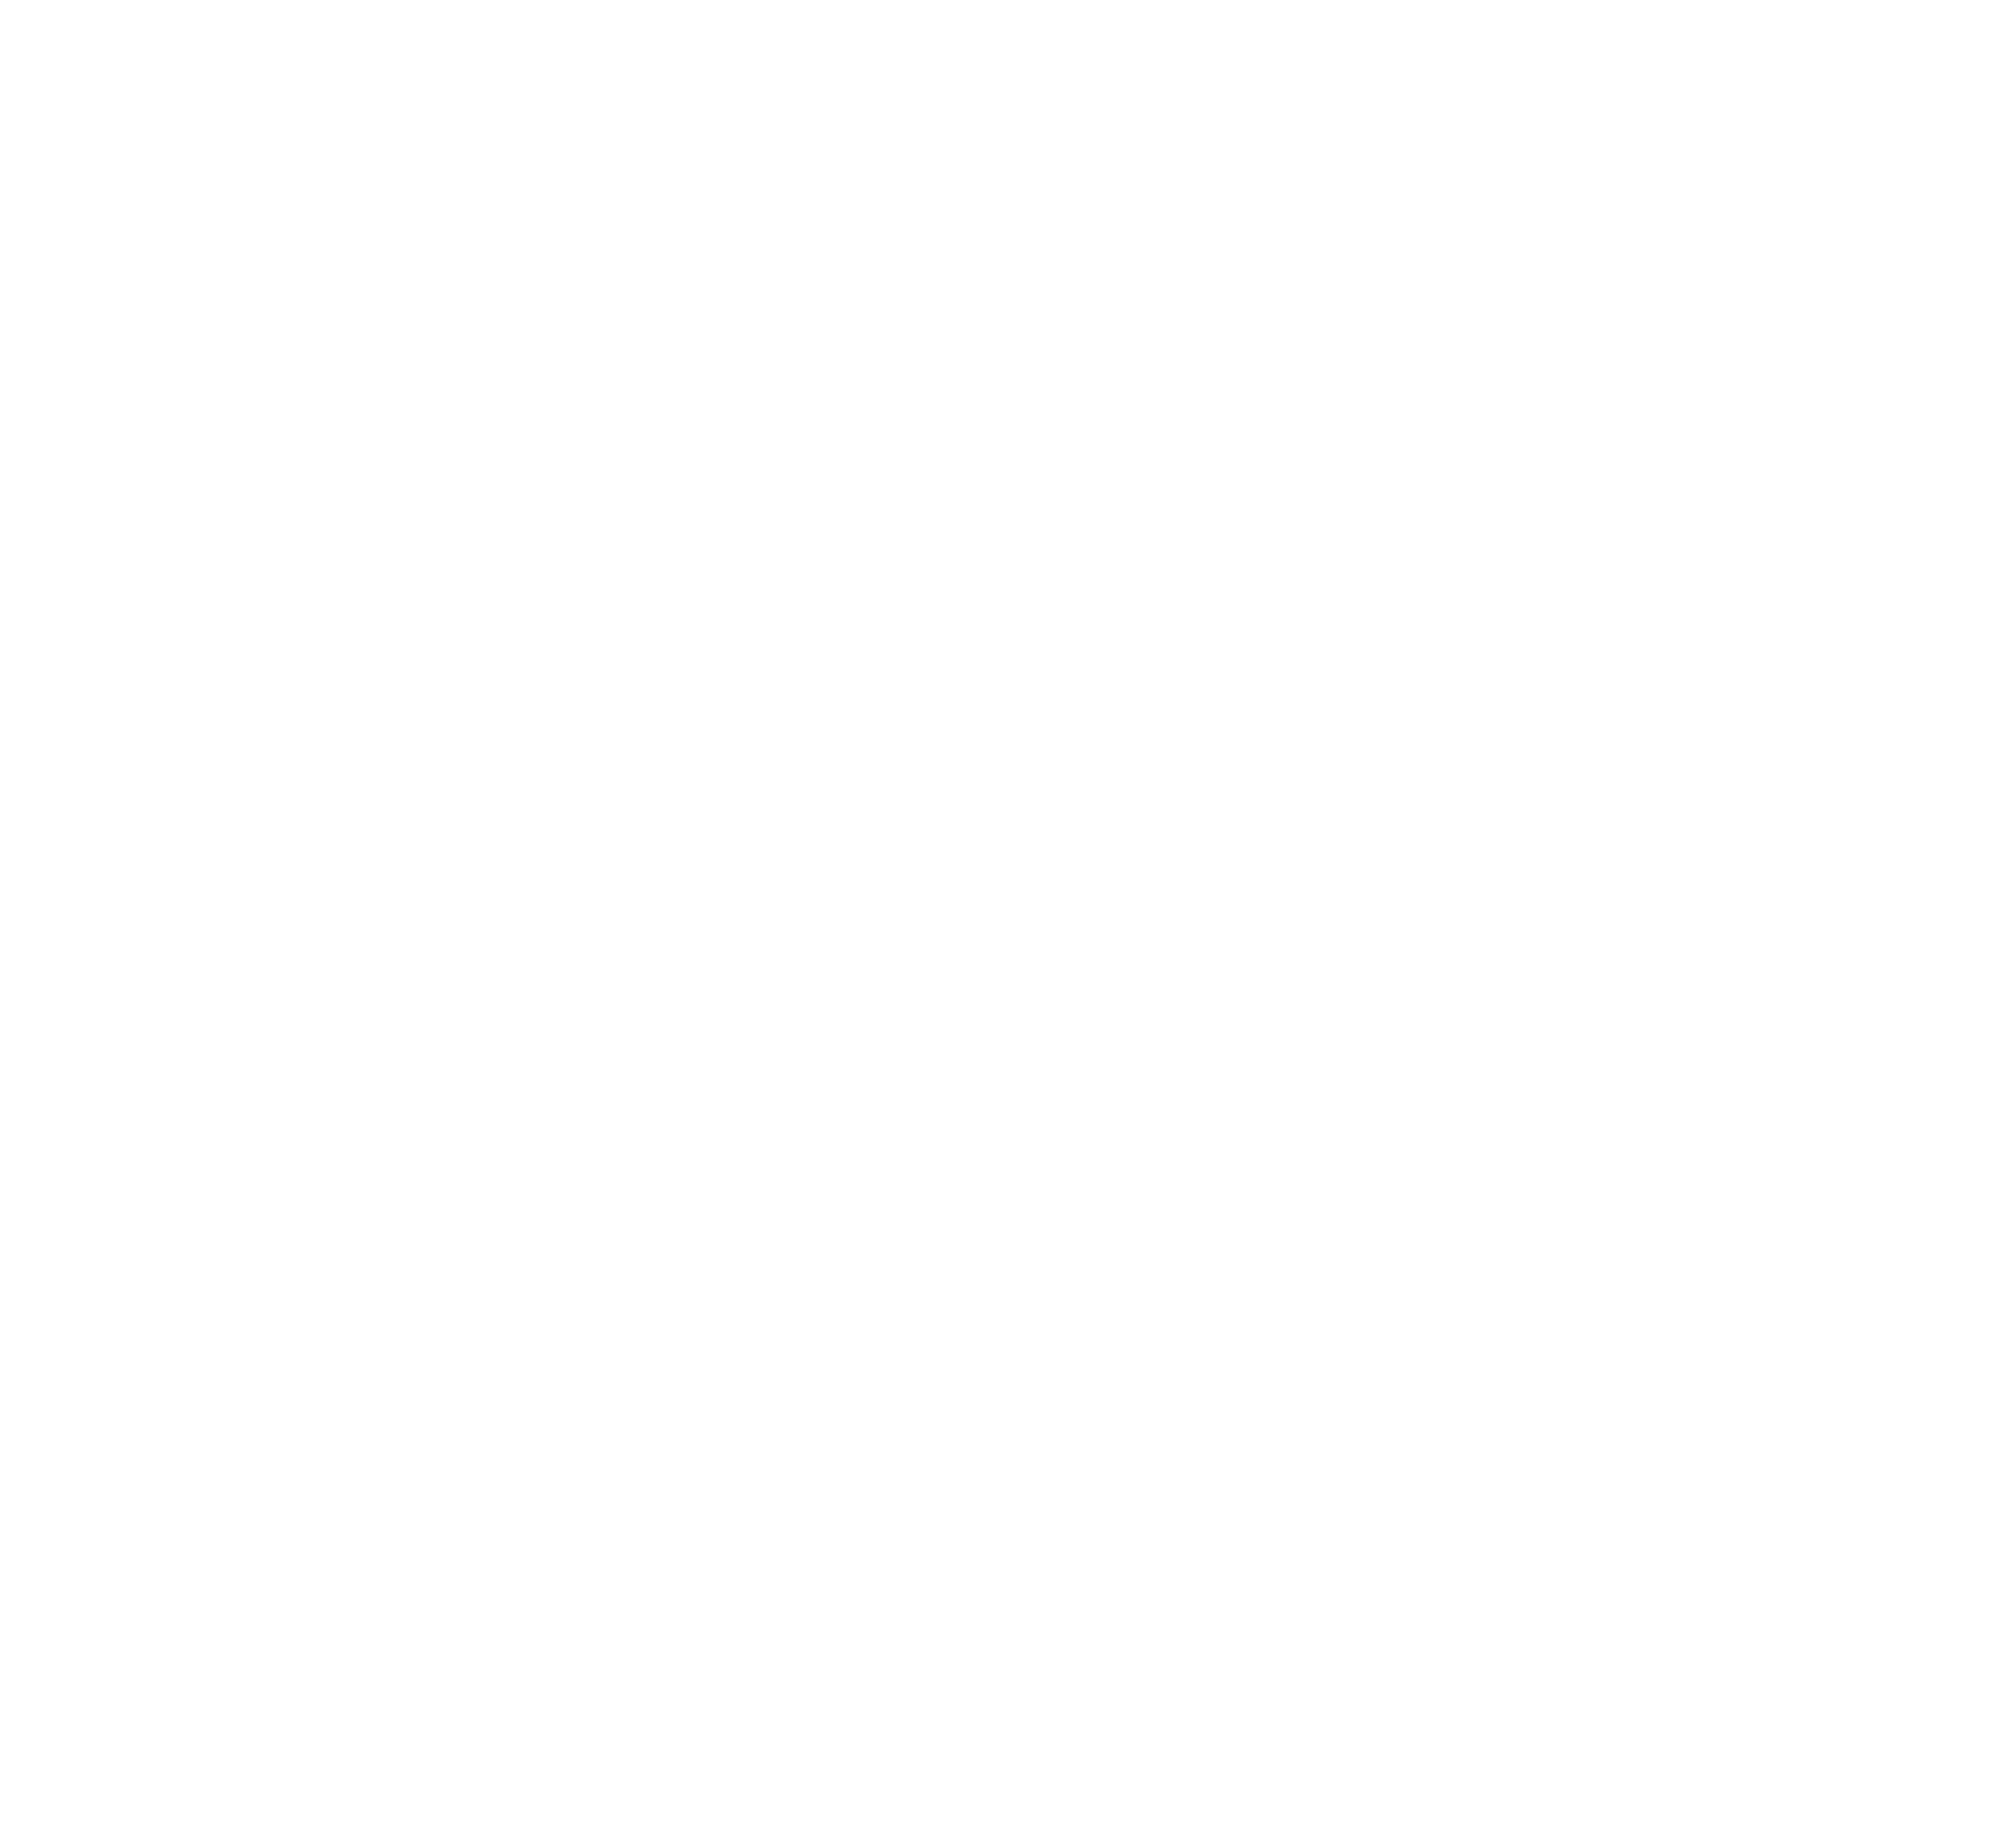 Houston Area Urban Forestry Council